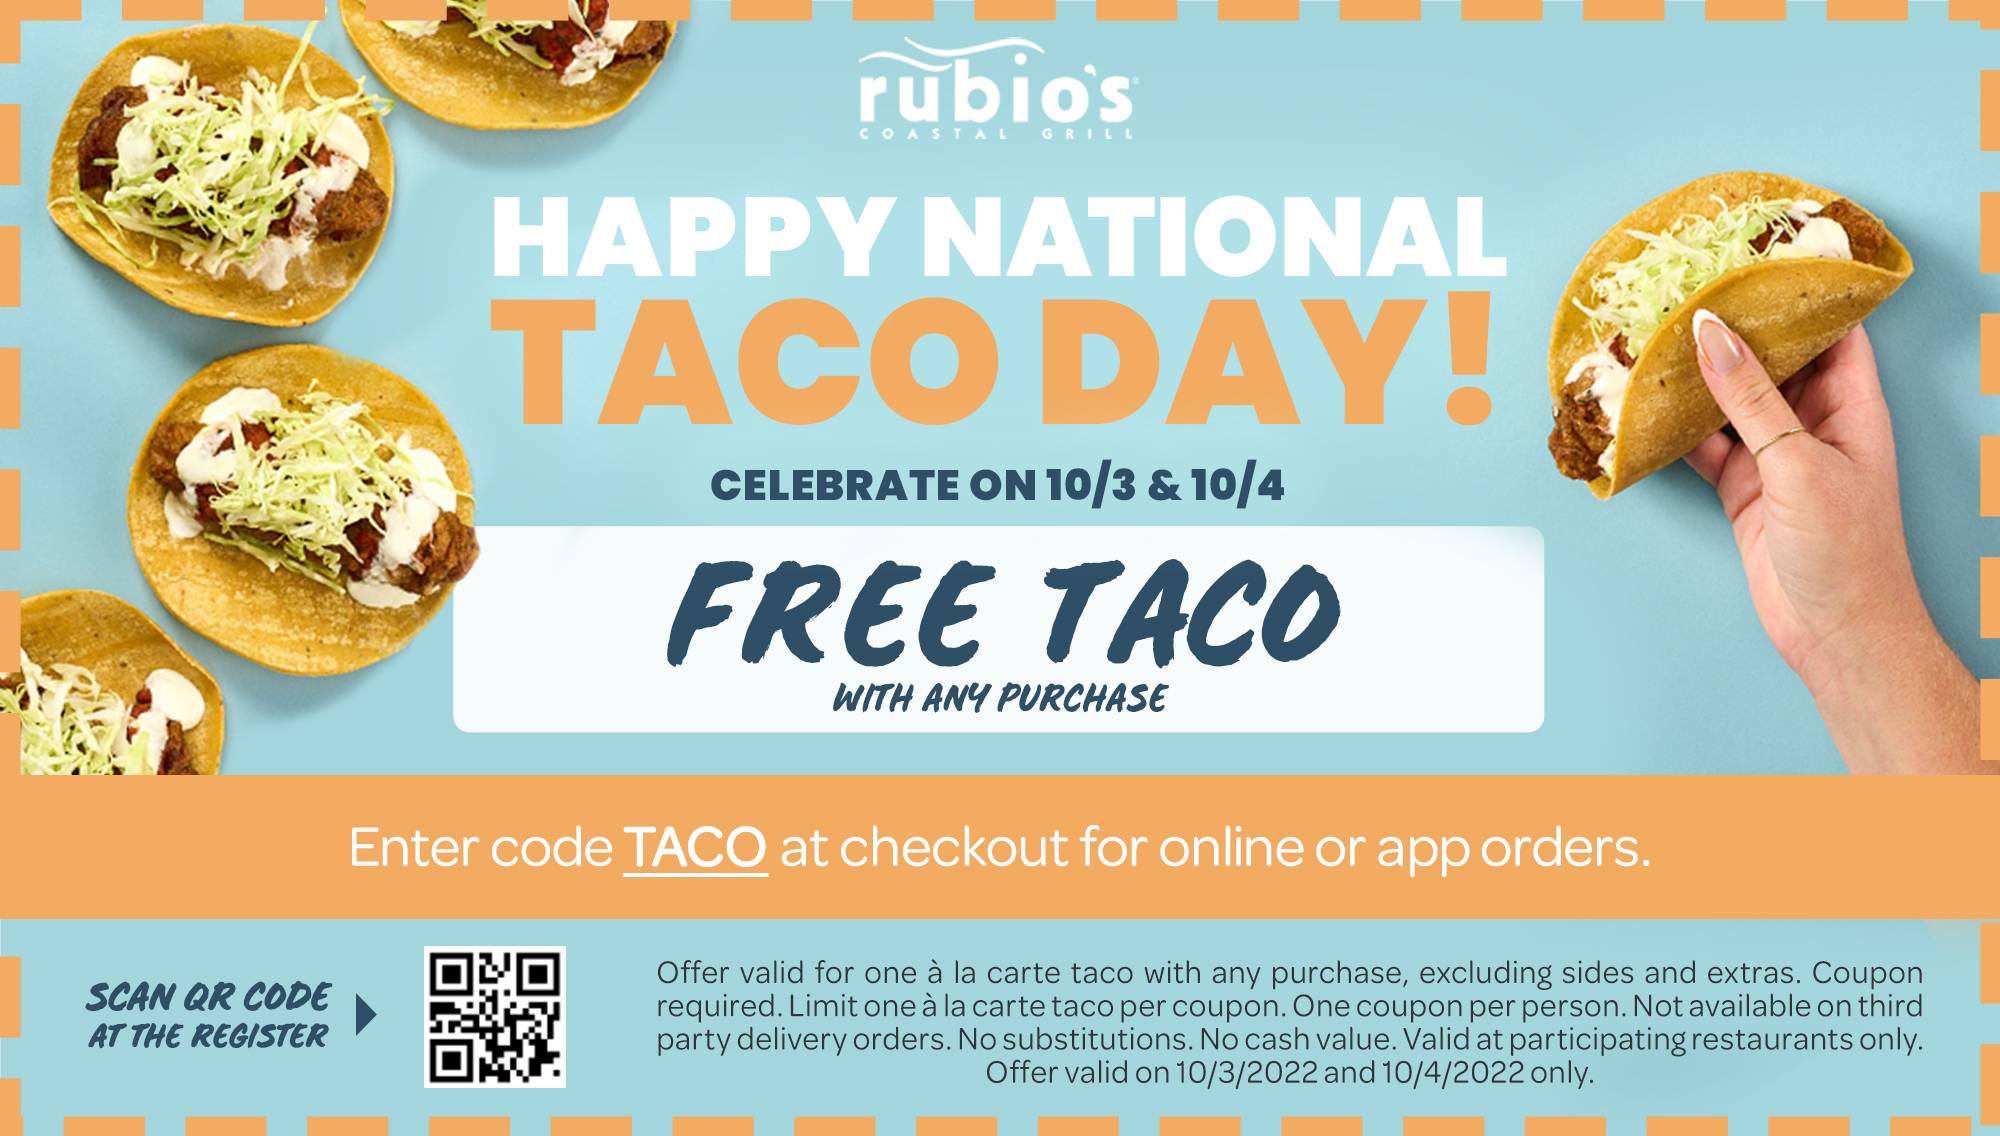 Free Taco with Any Purchase on 10/3 and 10/4 only